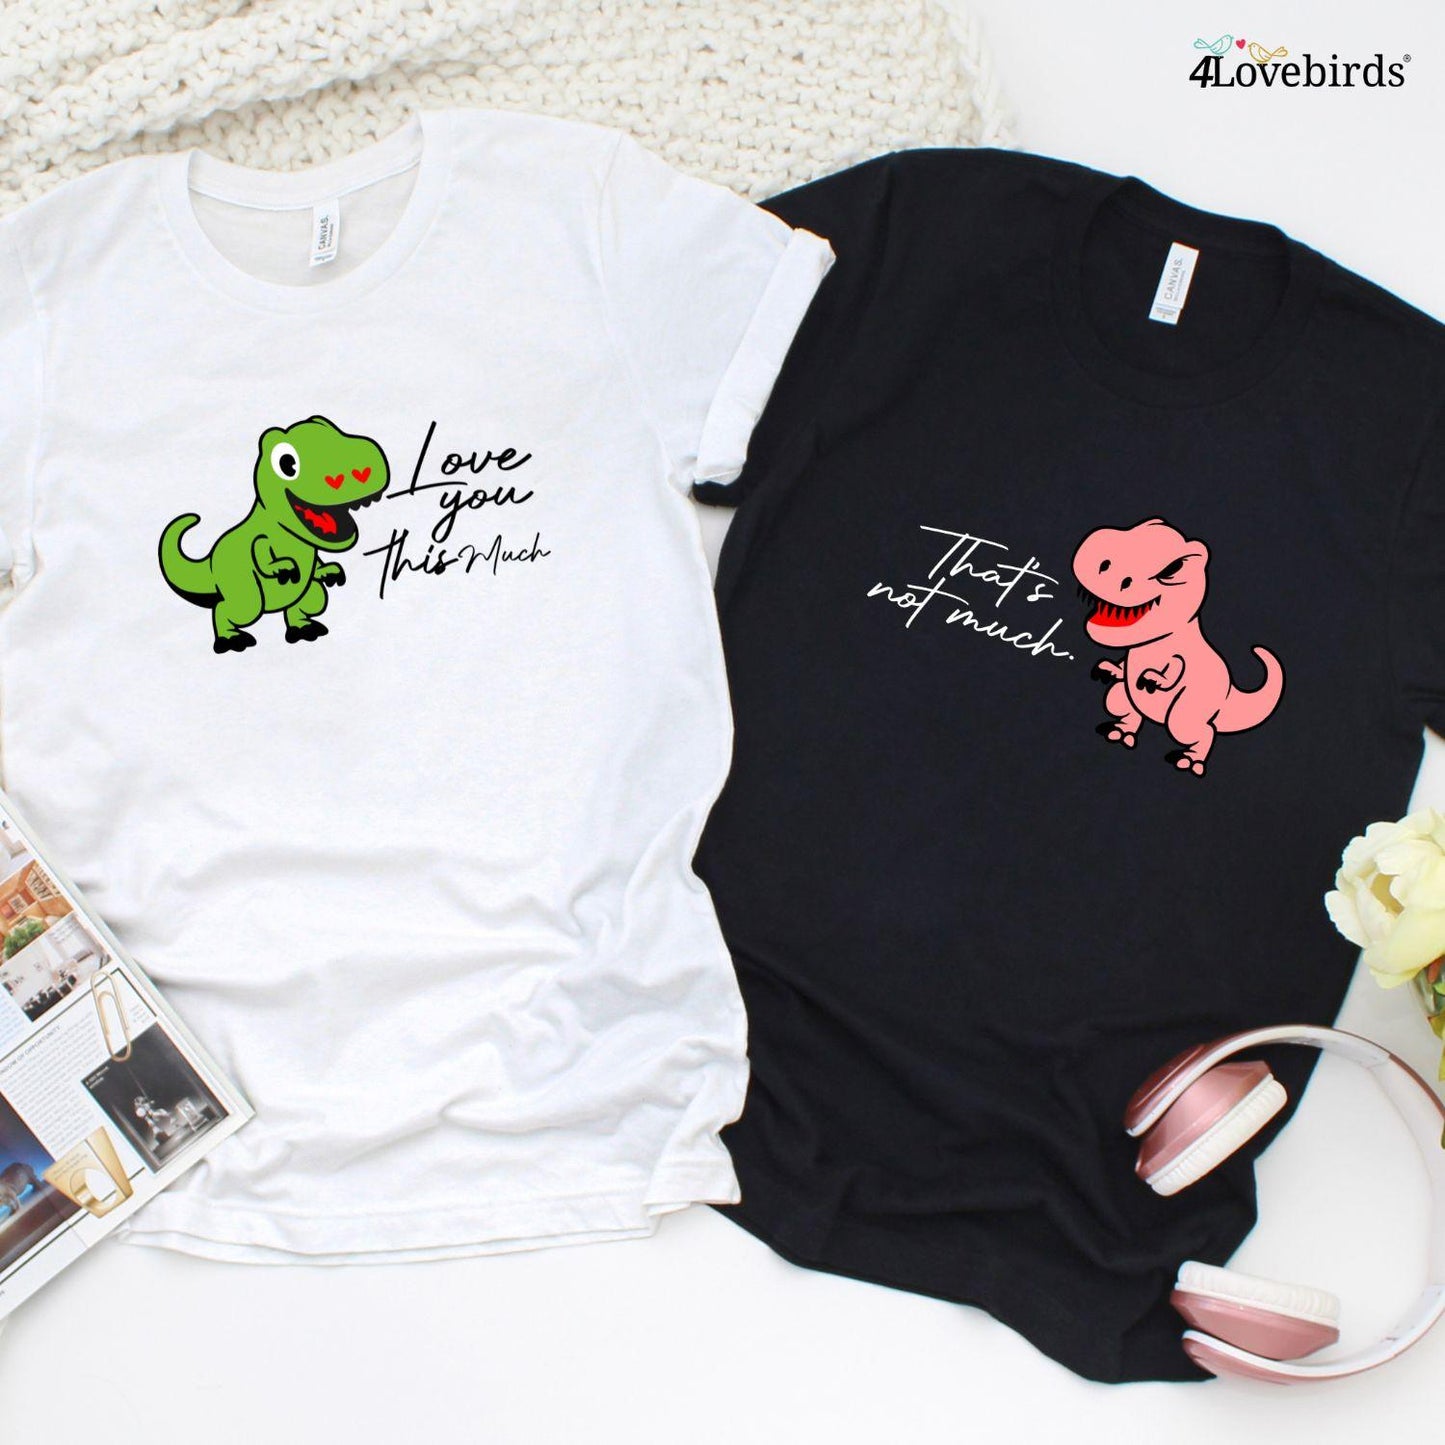 I Love You This Much/That's Not Much! Funny T-Rex Couple Matching Outfits - 4Lovebirds